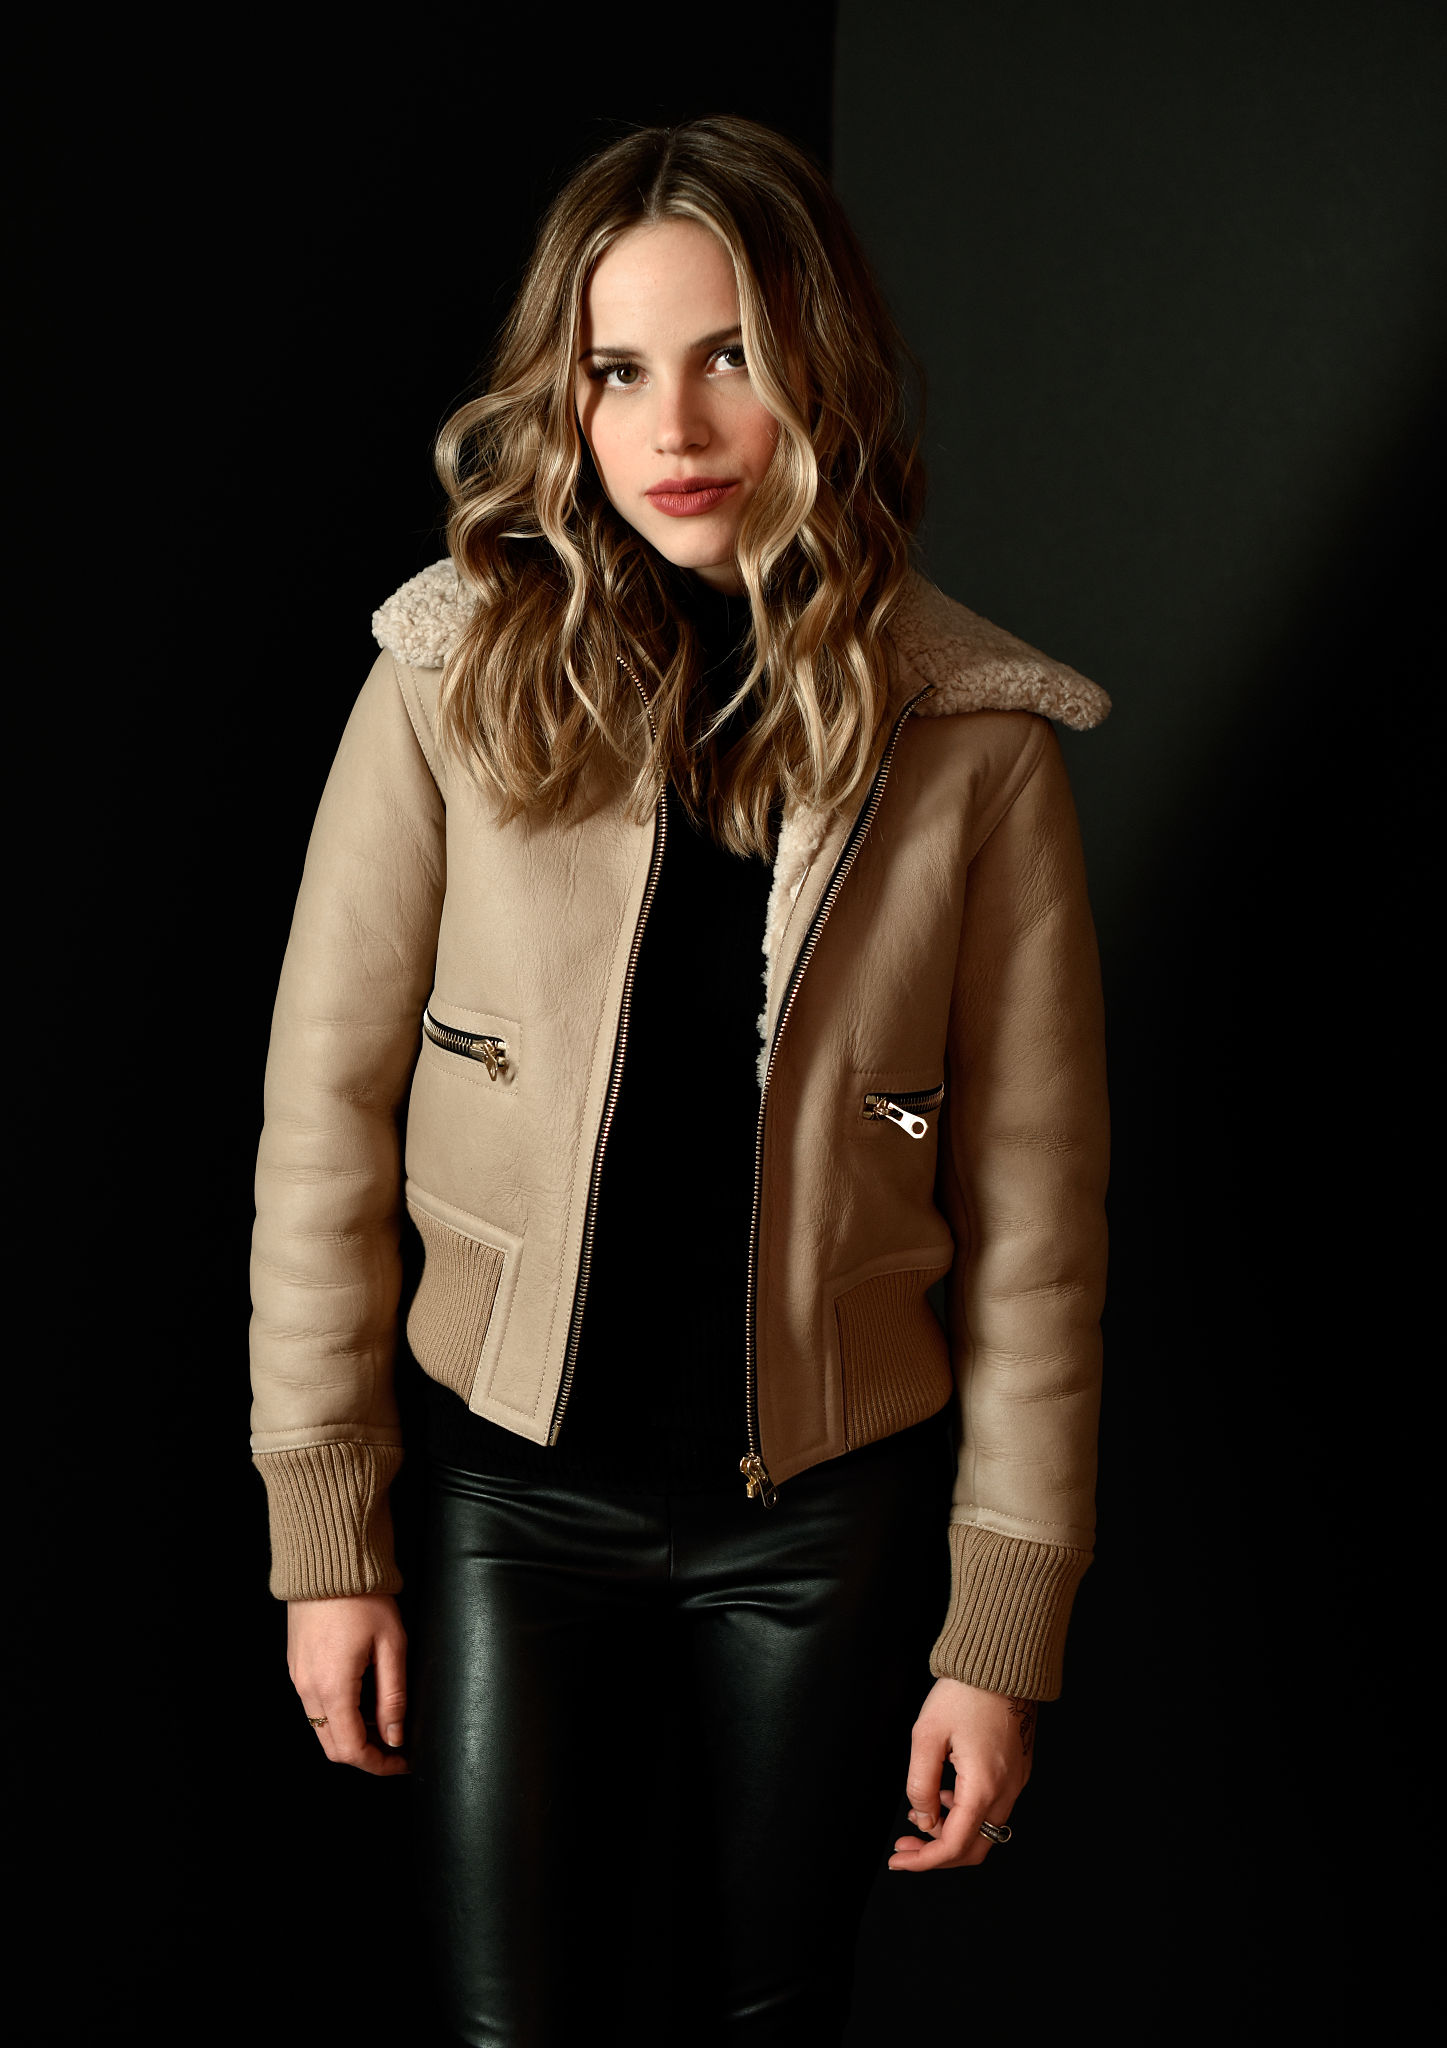 Halston Sage Actress Women Jacket Blonde Curly Hair Looking At Viewer Leather Pants Leather Jackets  1447x2048